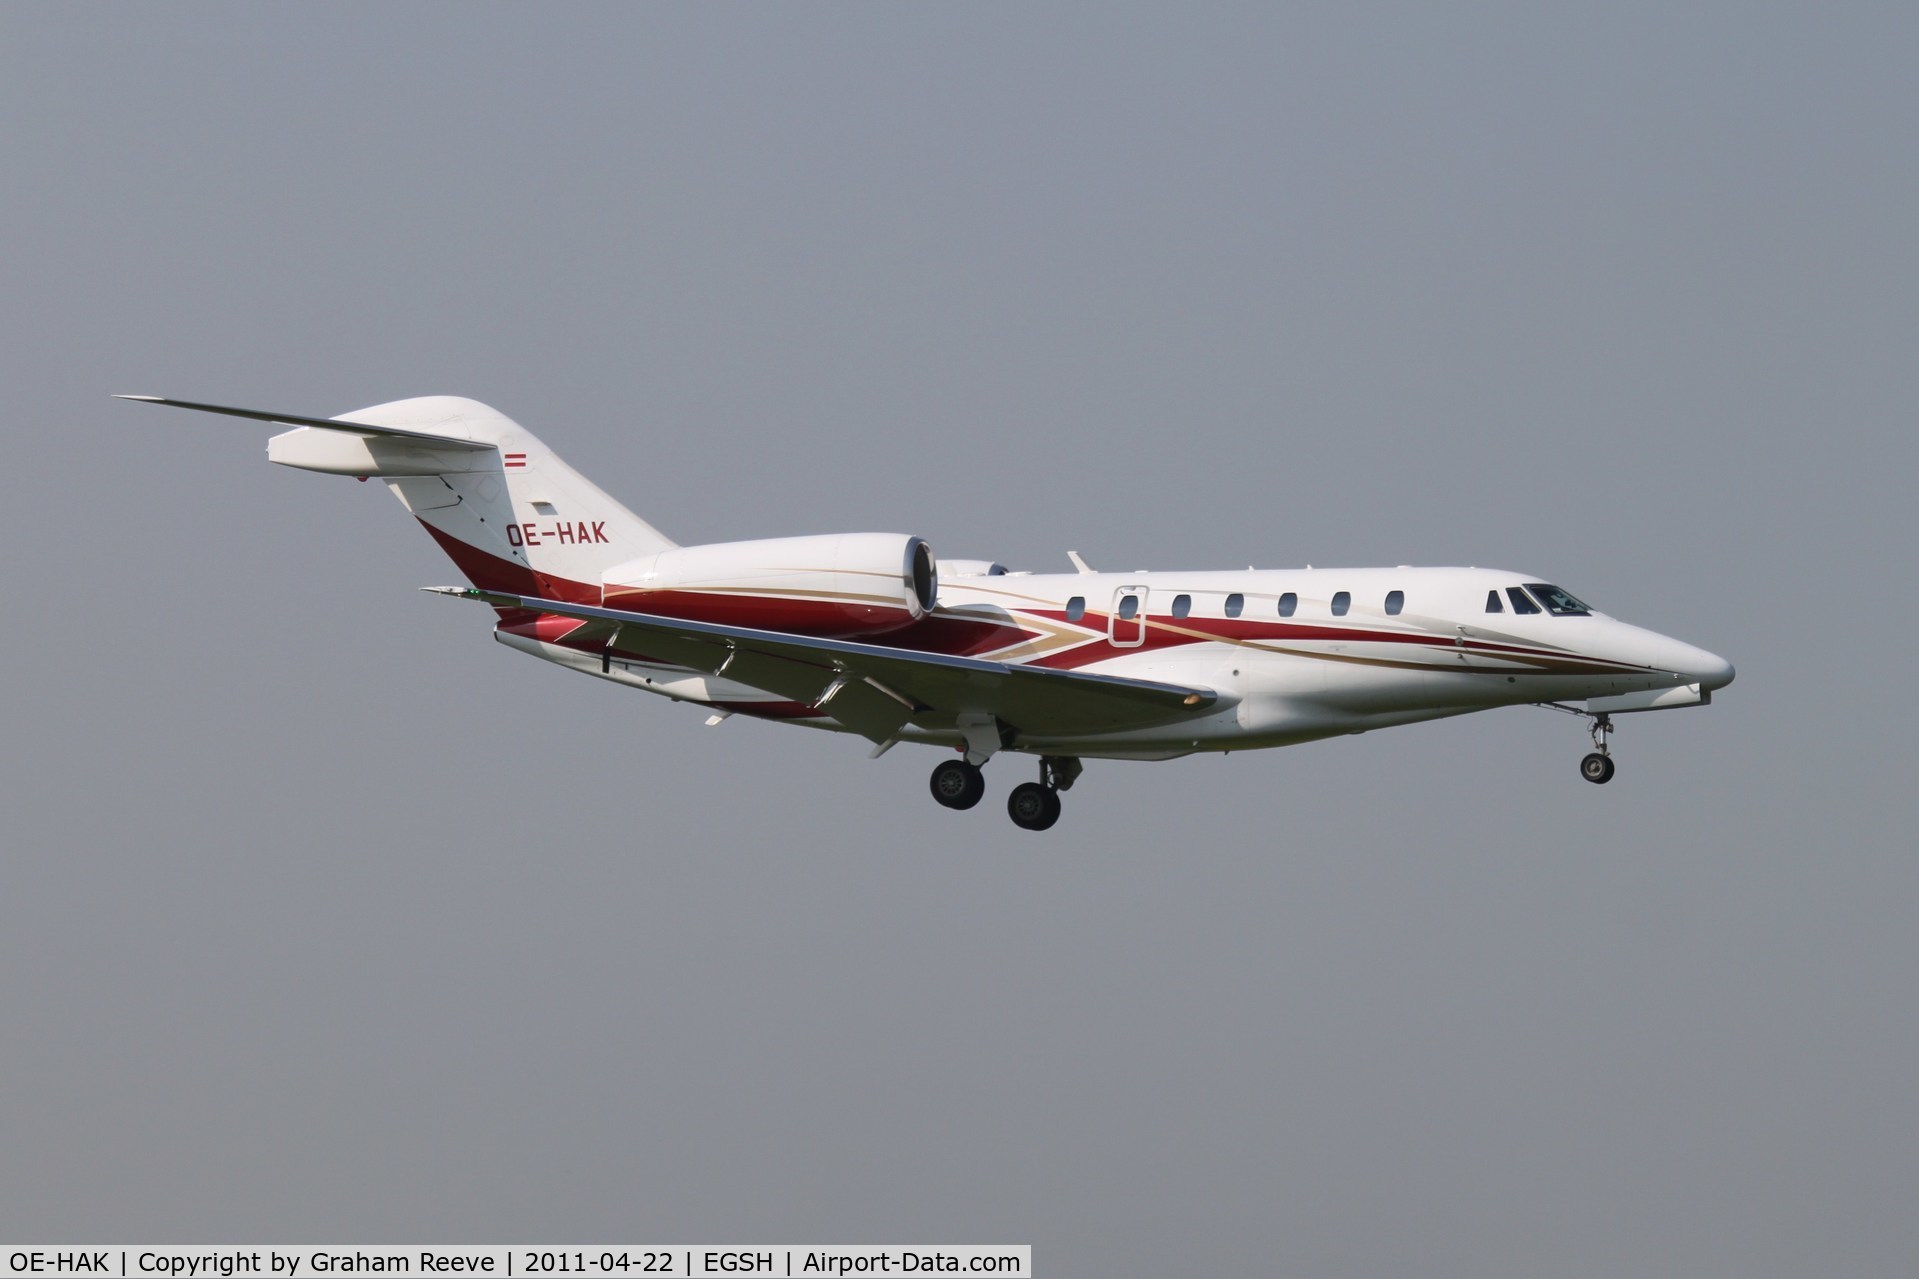 OE-HAK, 2009 Cessna 750 Citation X Citation X C/N 750-0300, About to touch down.